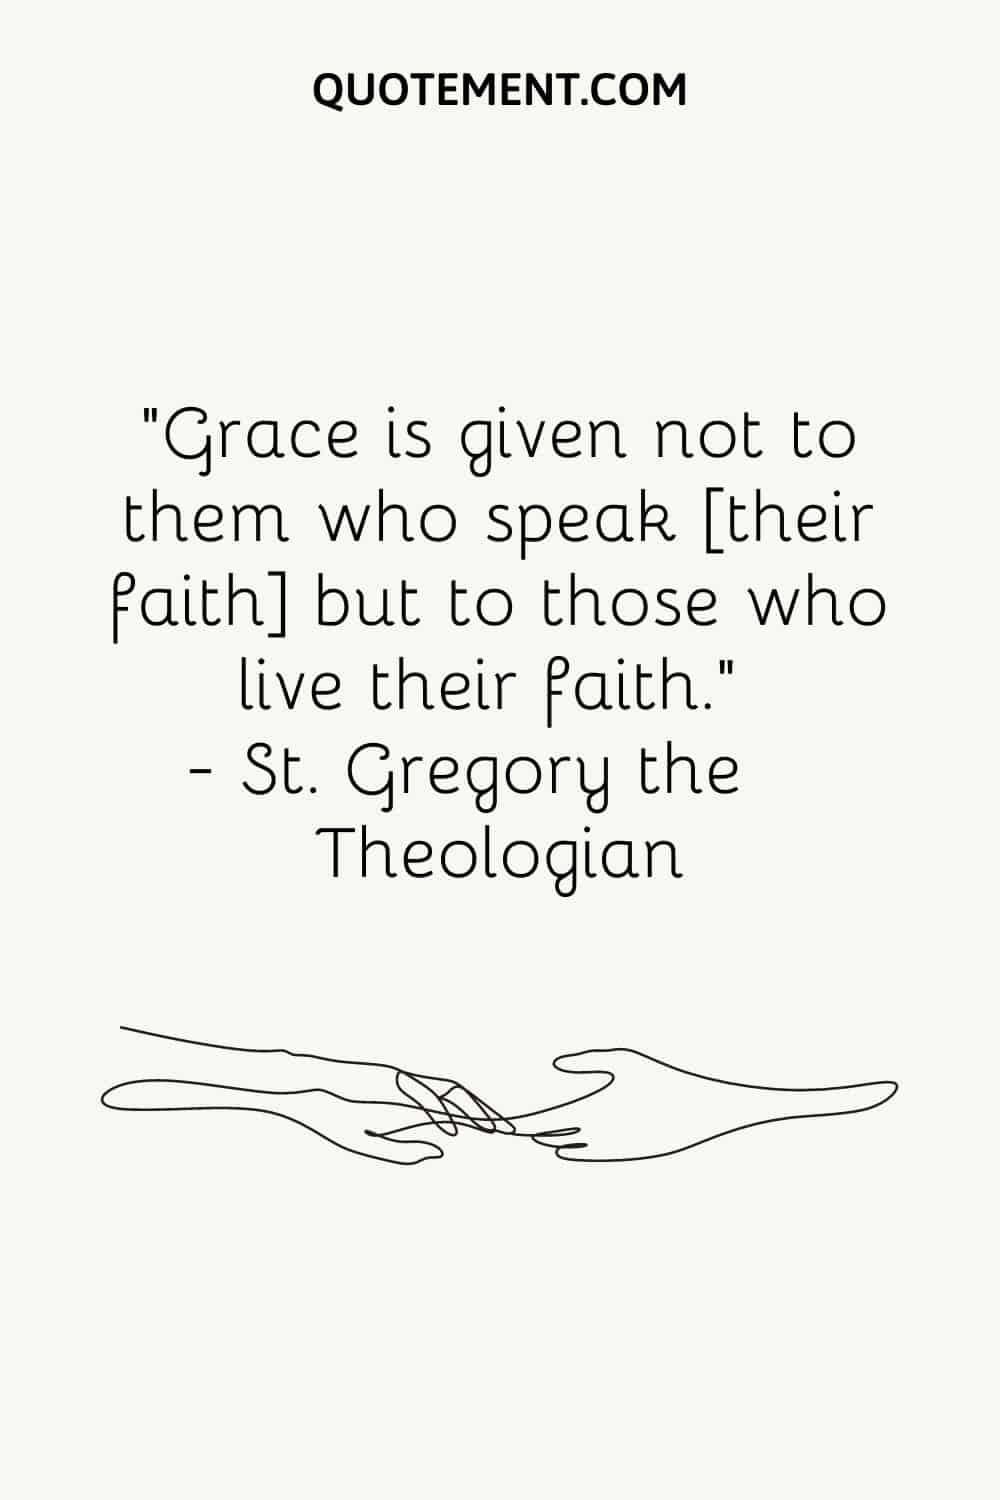 Grace is given not to them who speak [their faith] but to those who live their faith